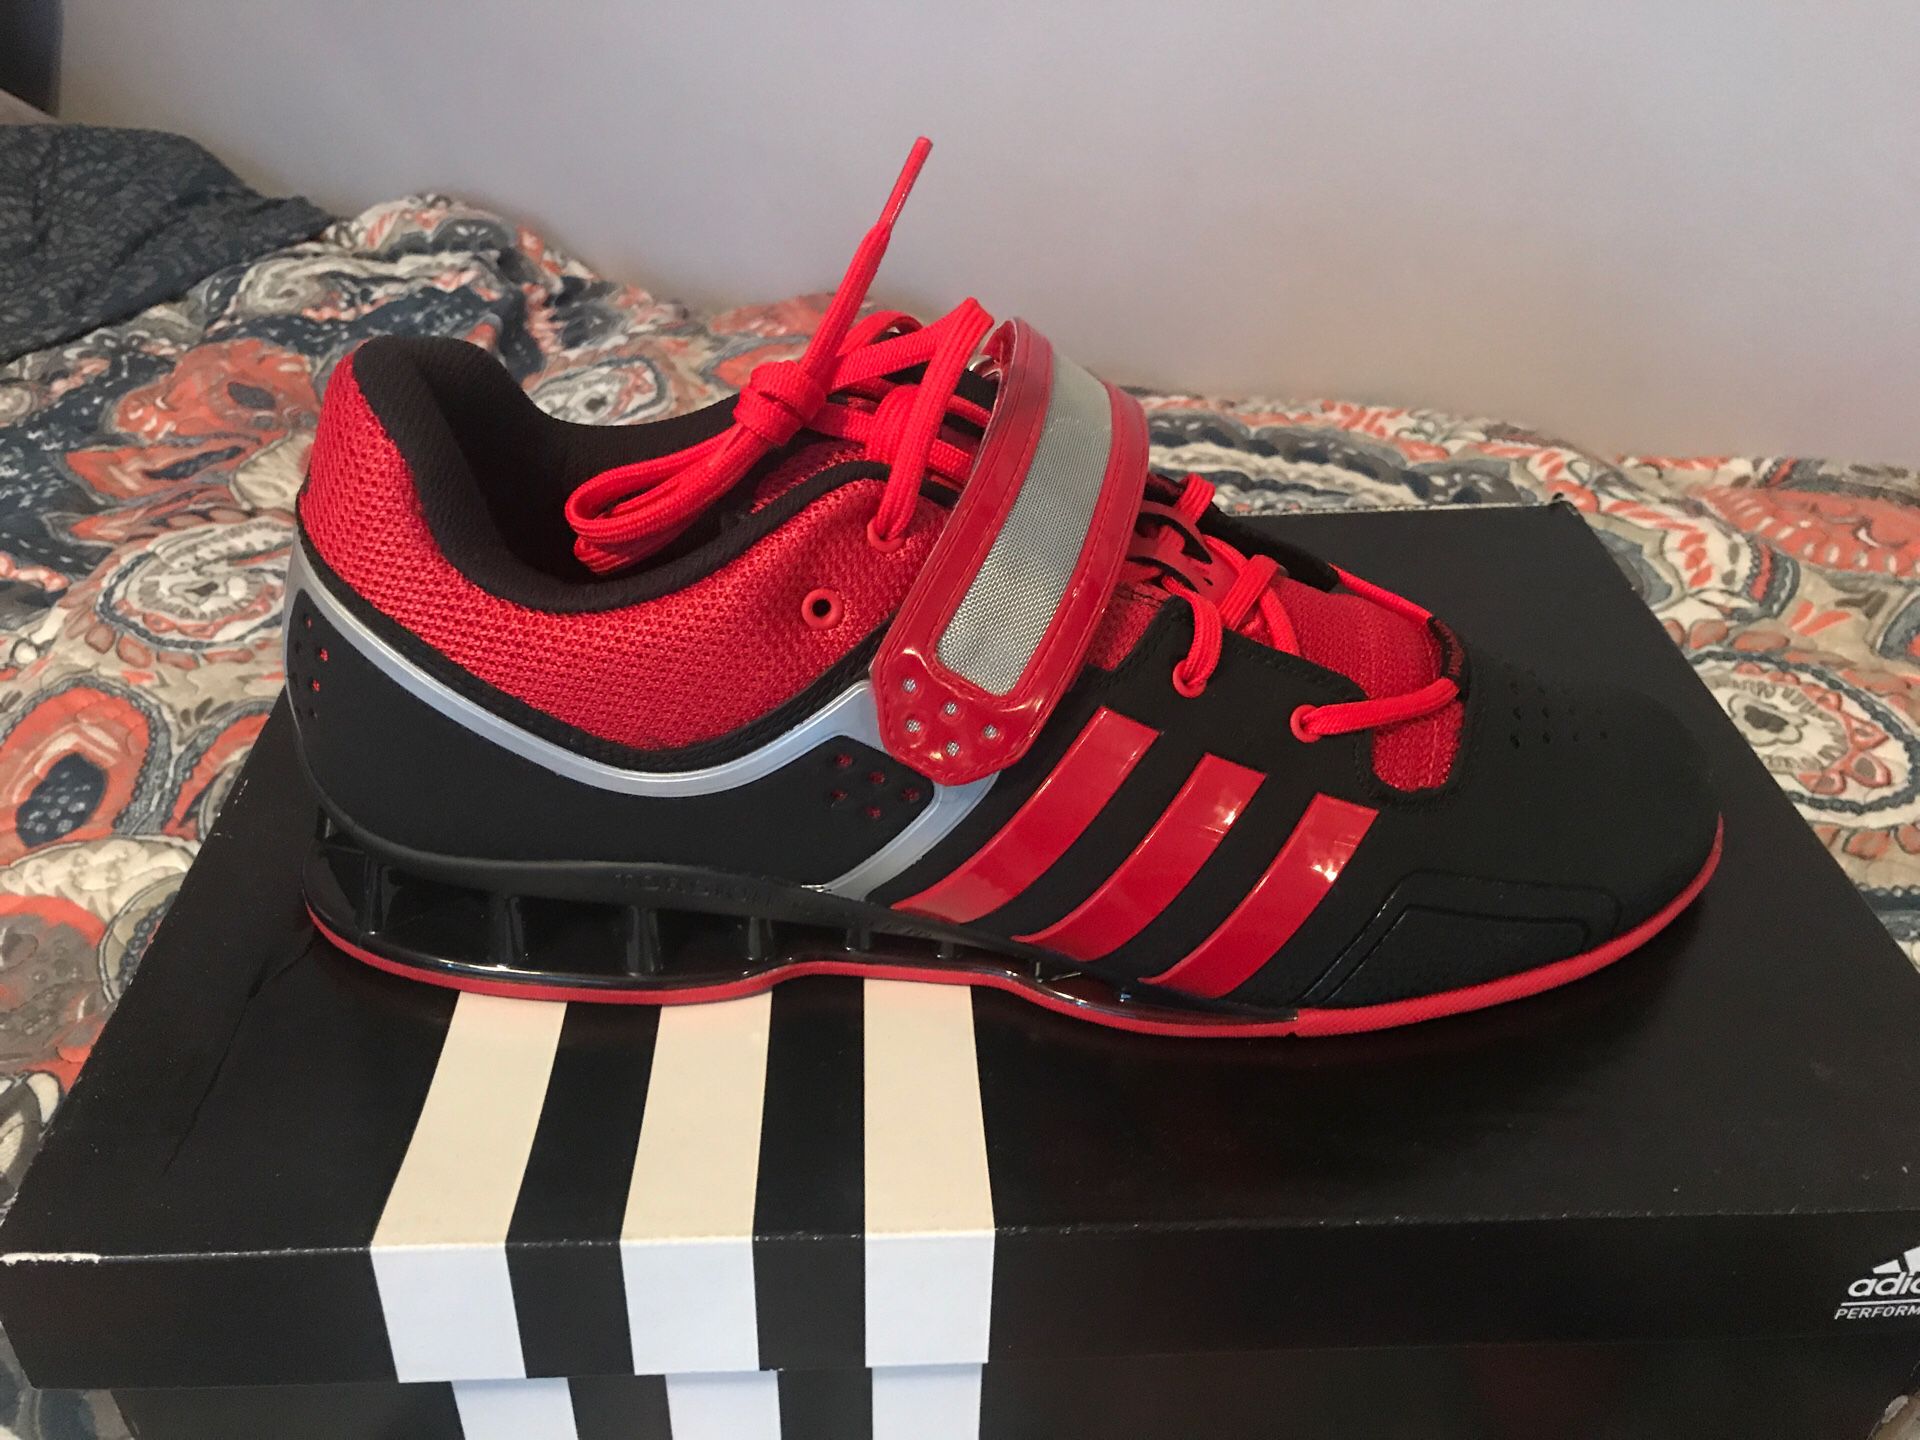 Adidas weight lifting shoes “Adipower” New in box. Size 13 also have size 12 1/2. Same color all New in the box. $70 OBO